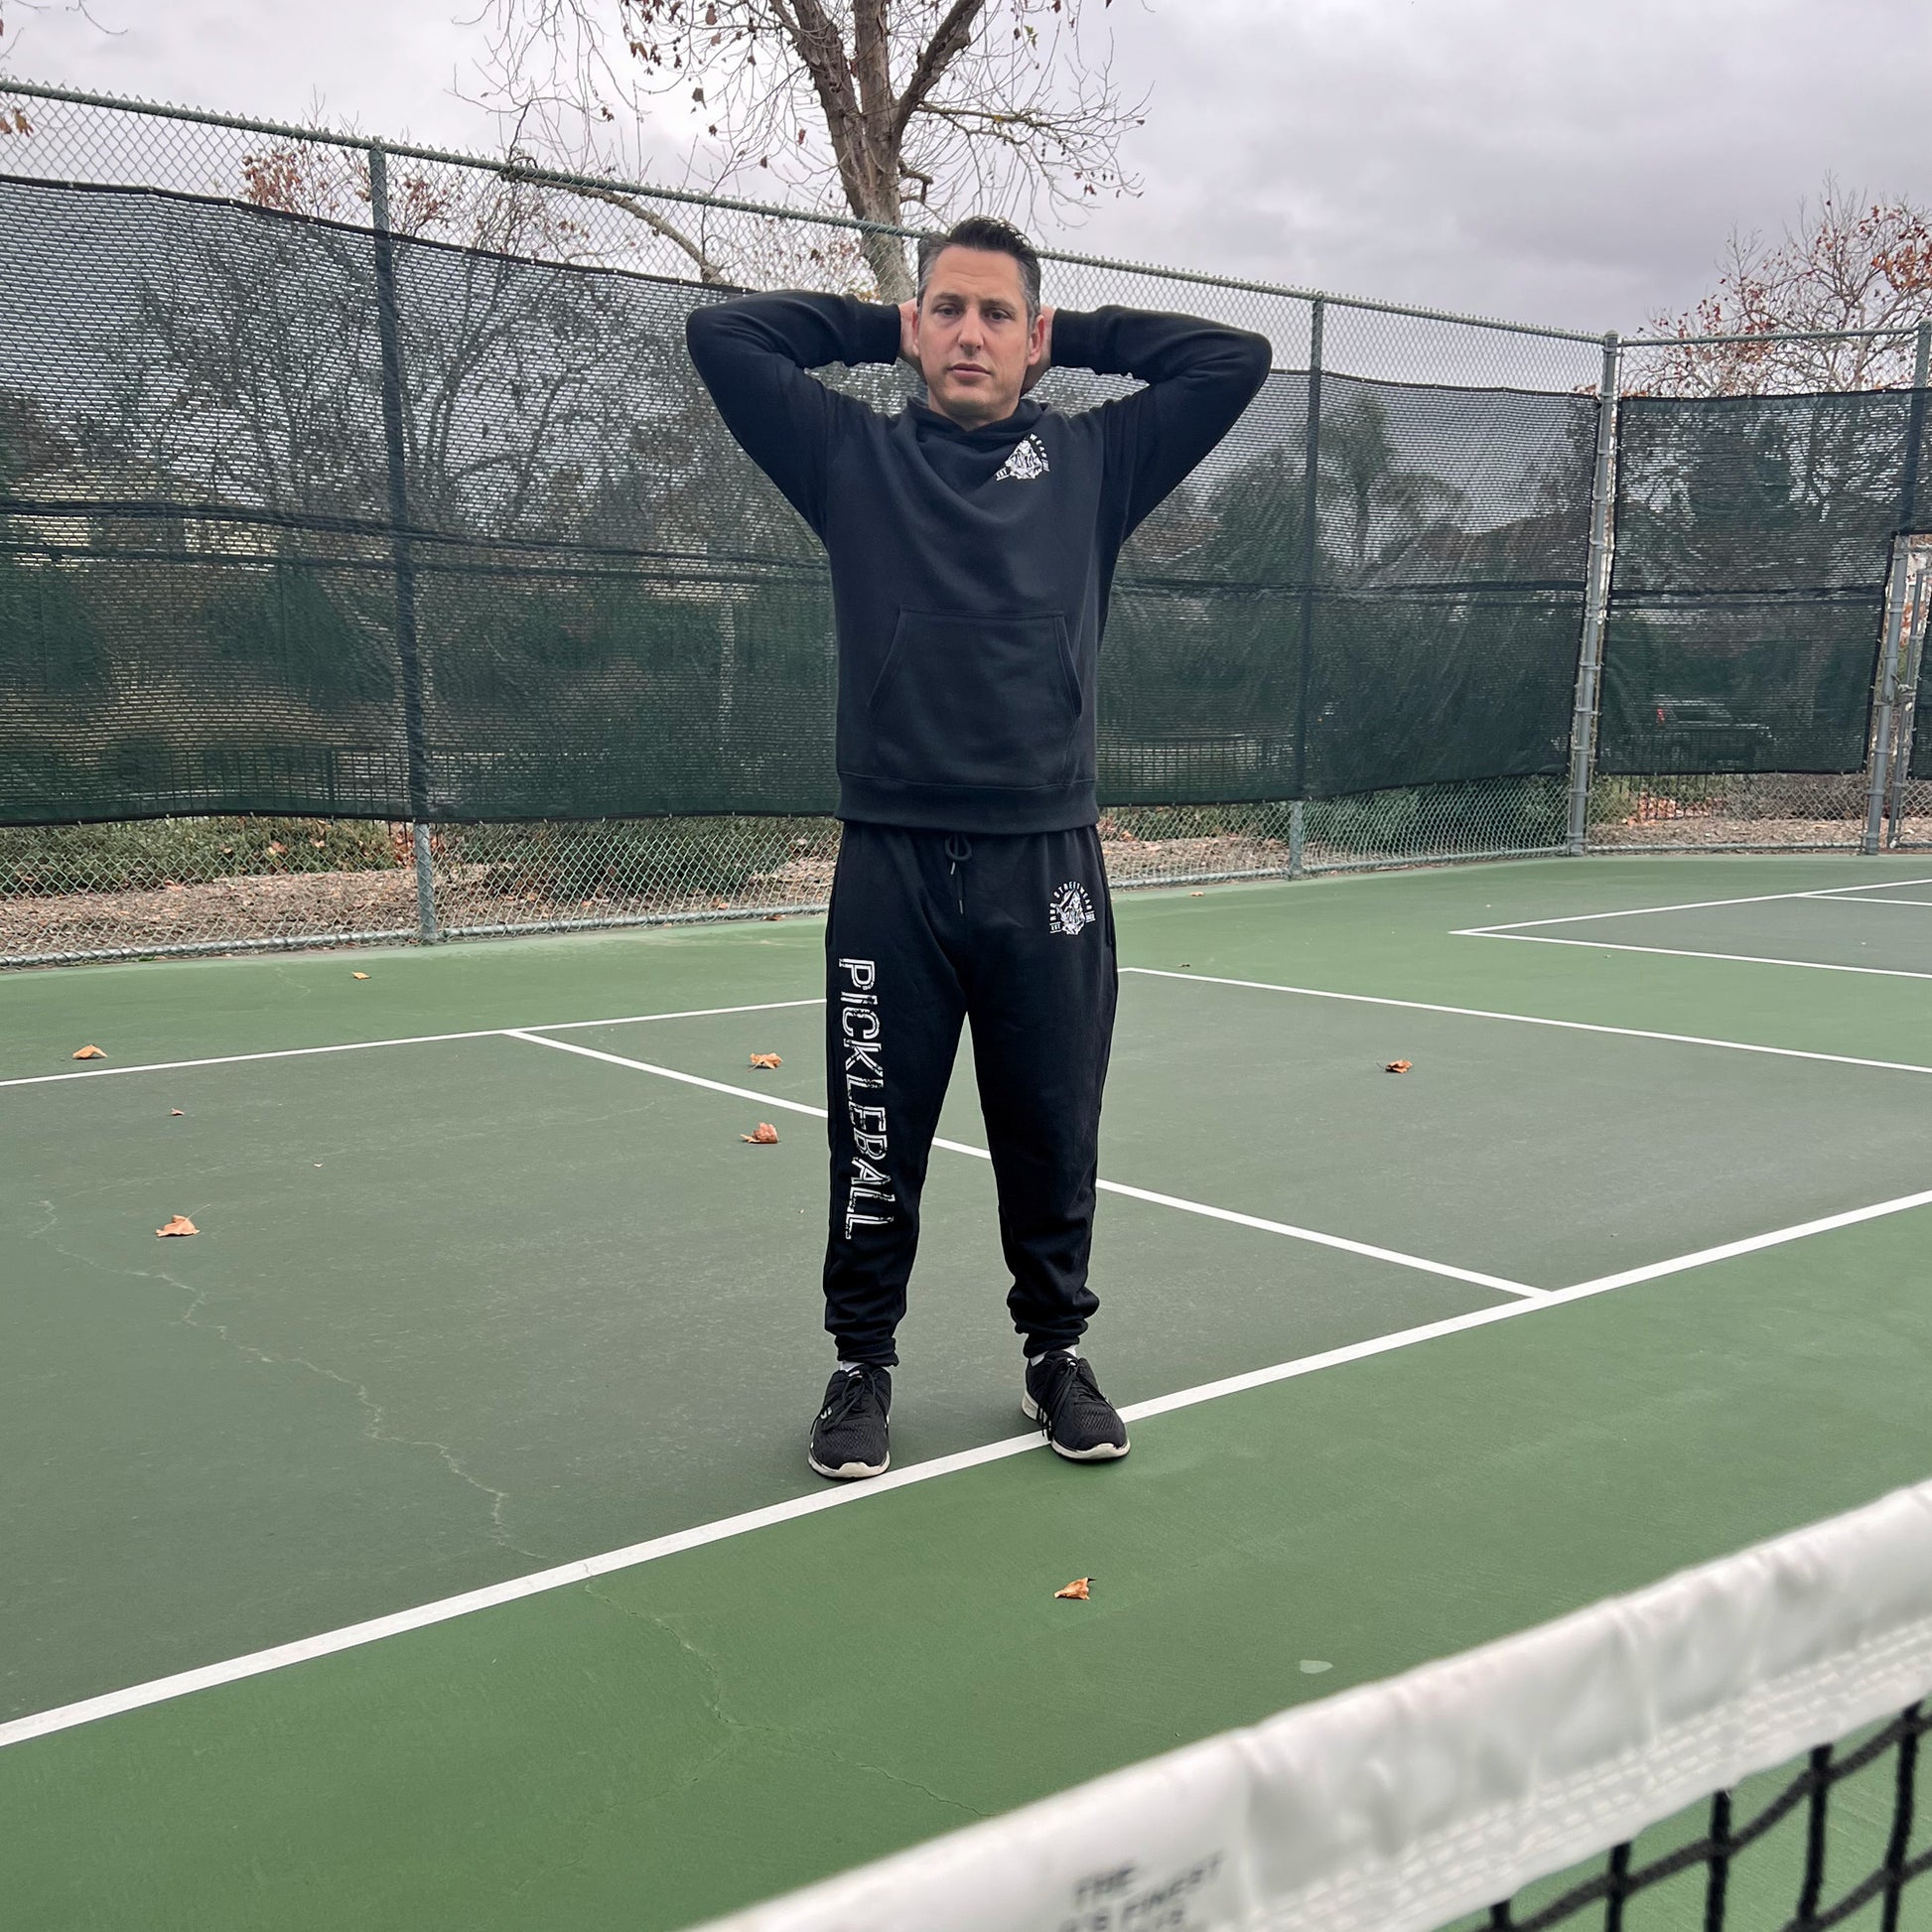 Pickleball Joggers on the court